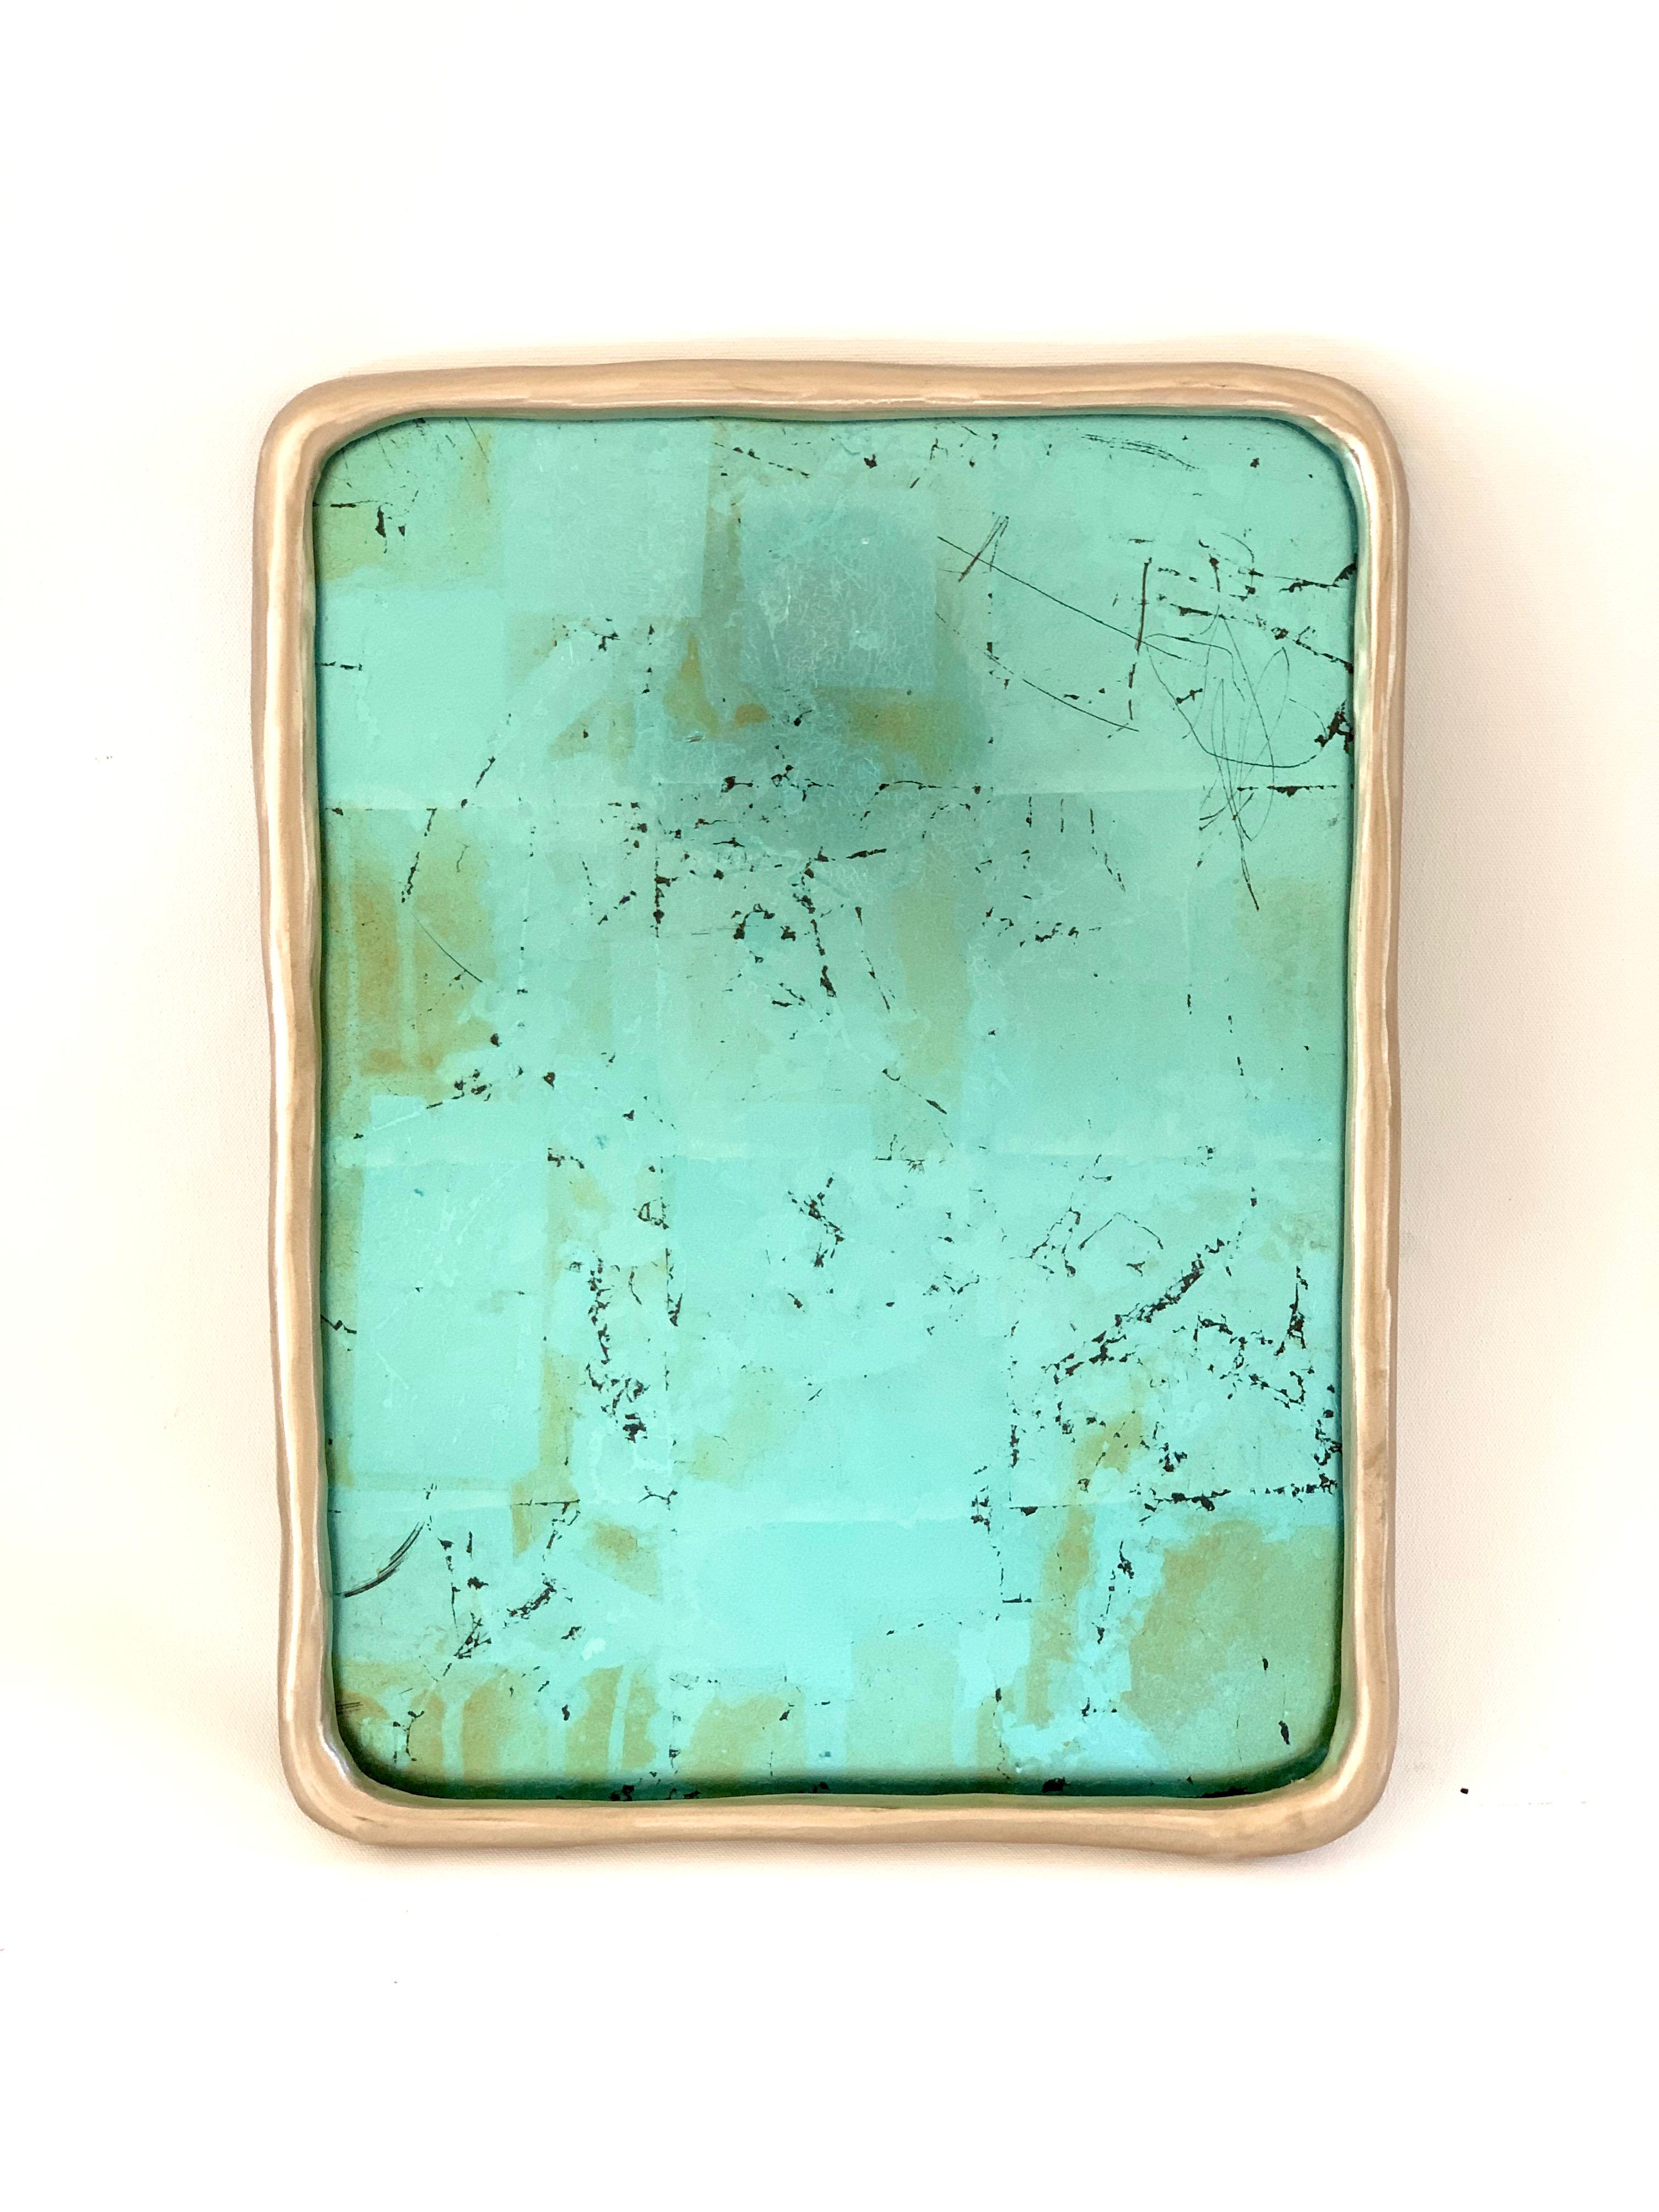 This custom crafted high polished bronze mirror frame with blue-dyed silver leaf over glass by Brooklyn based contemporary artist Alexander Kellum . The bronze body has an irregular diameter along the form creating unique reflections of light. The